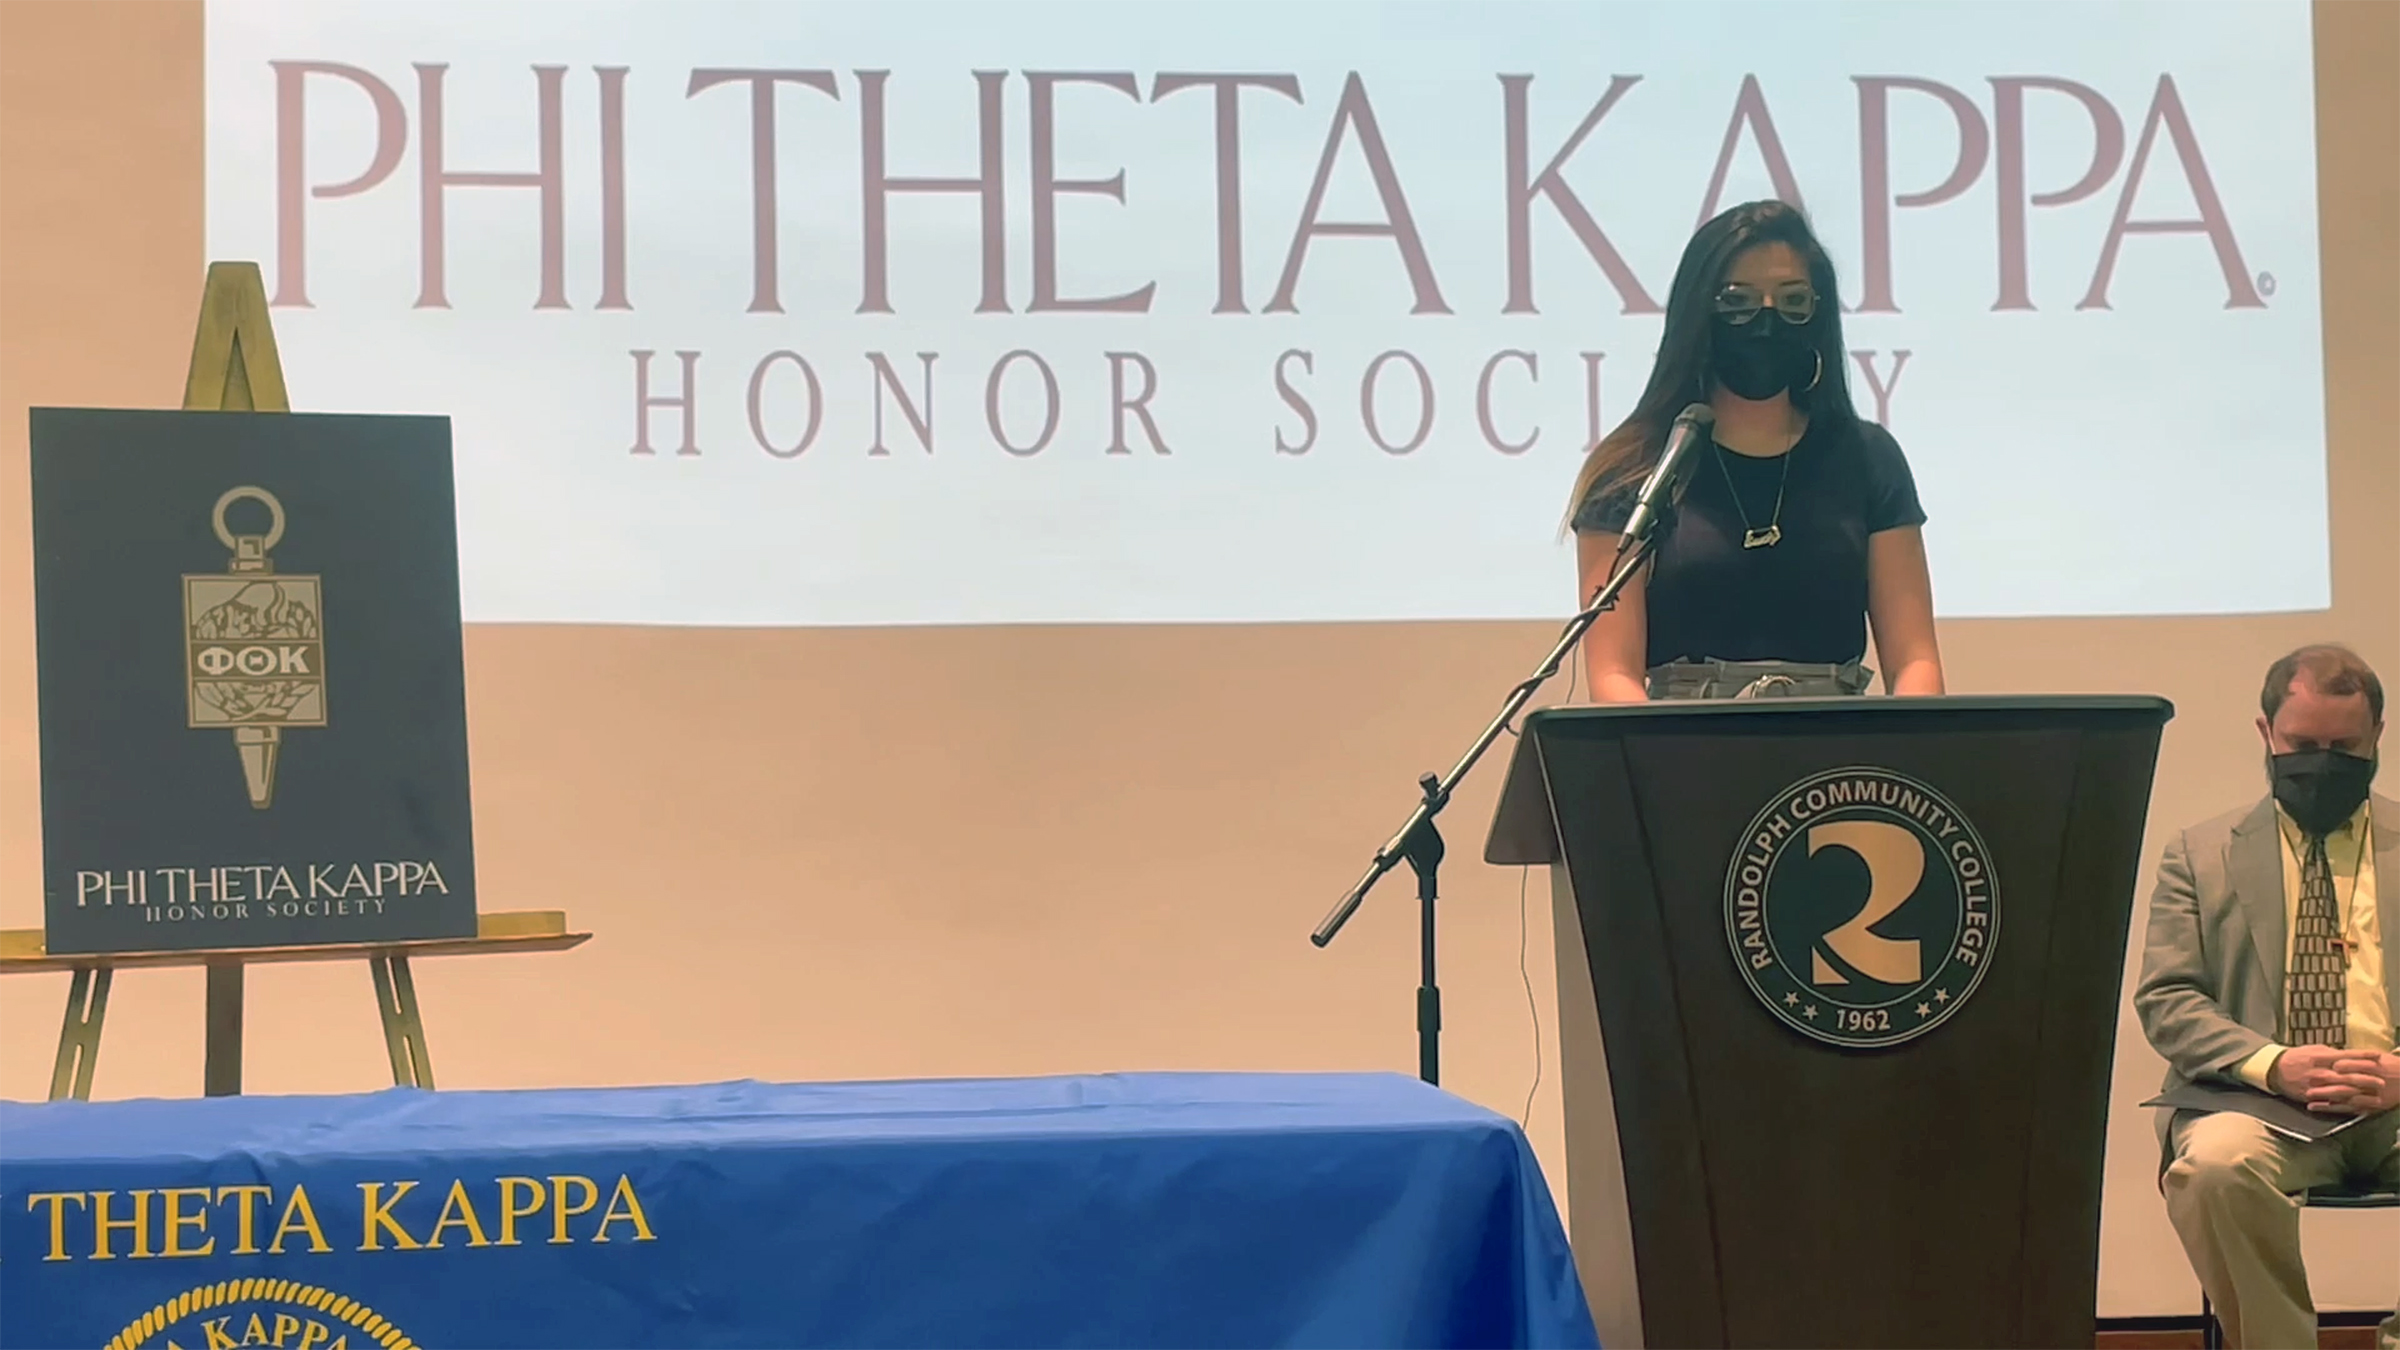 Randolph Community College Phi Theta Kappa Vice President Emily Ramirez gives the invocation during the honor society's virtual spring inducition ceremony April 24.